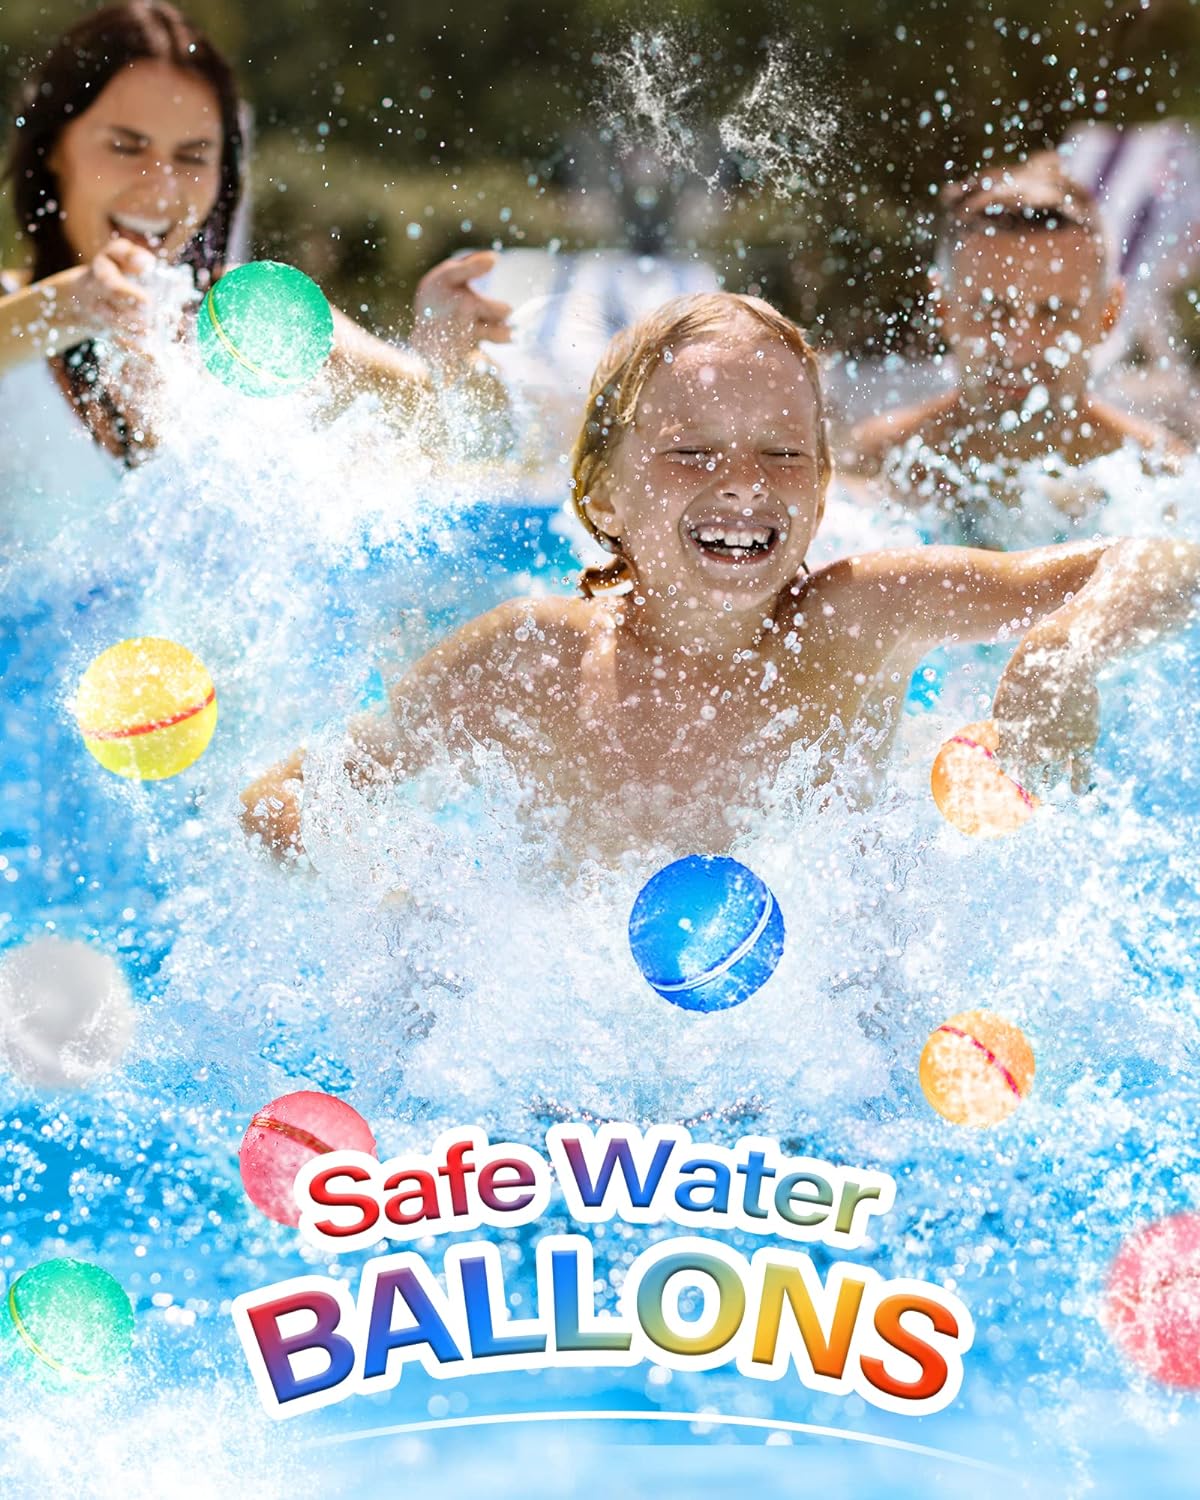 🥇Water Balloons Reusable, Summer Water Balls for Boys and Girls, Easy to Fill, Fun For Kids Ages 3-12, Water Splash Ball Pool Beach toys for Water Balloon Fights